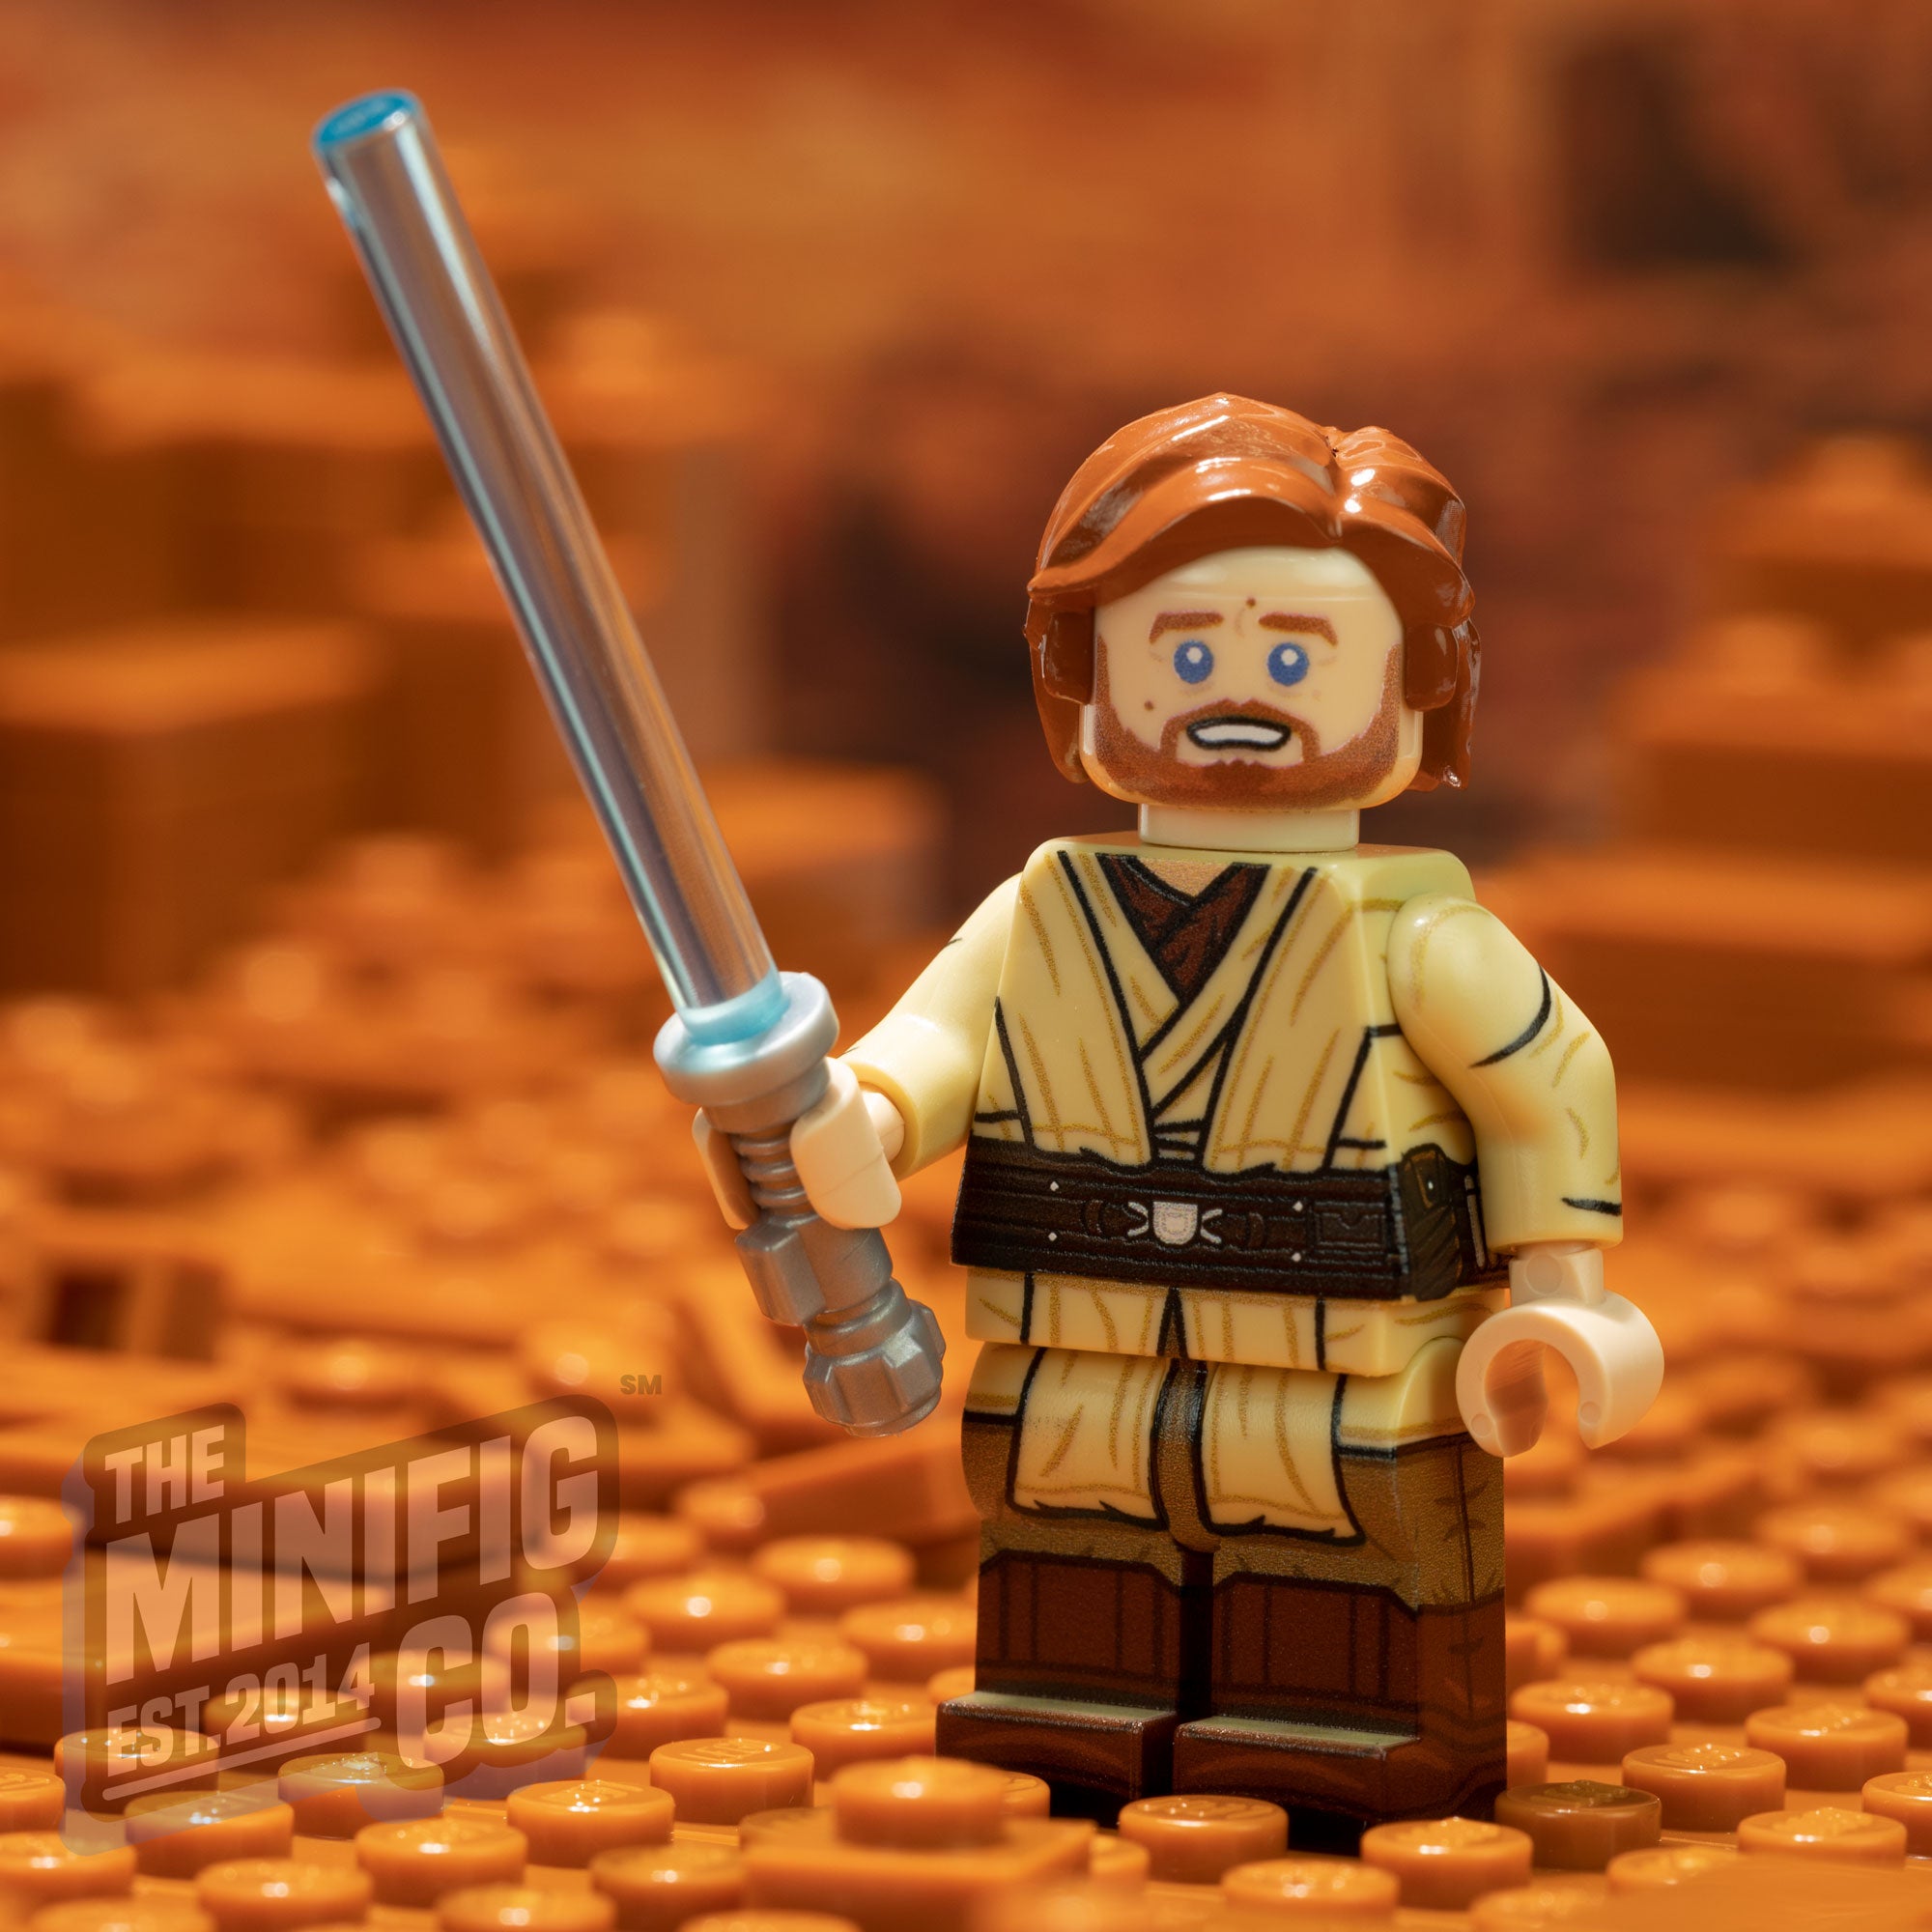 The Negotiator - ROTS - The Minifig Co.